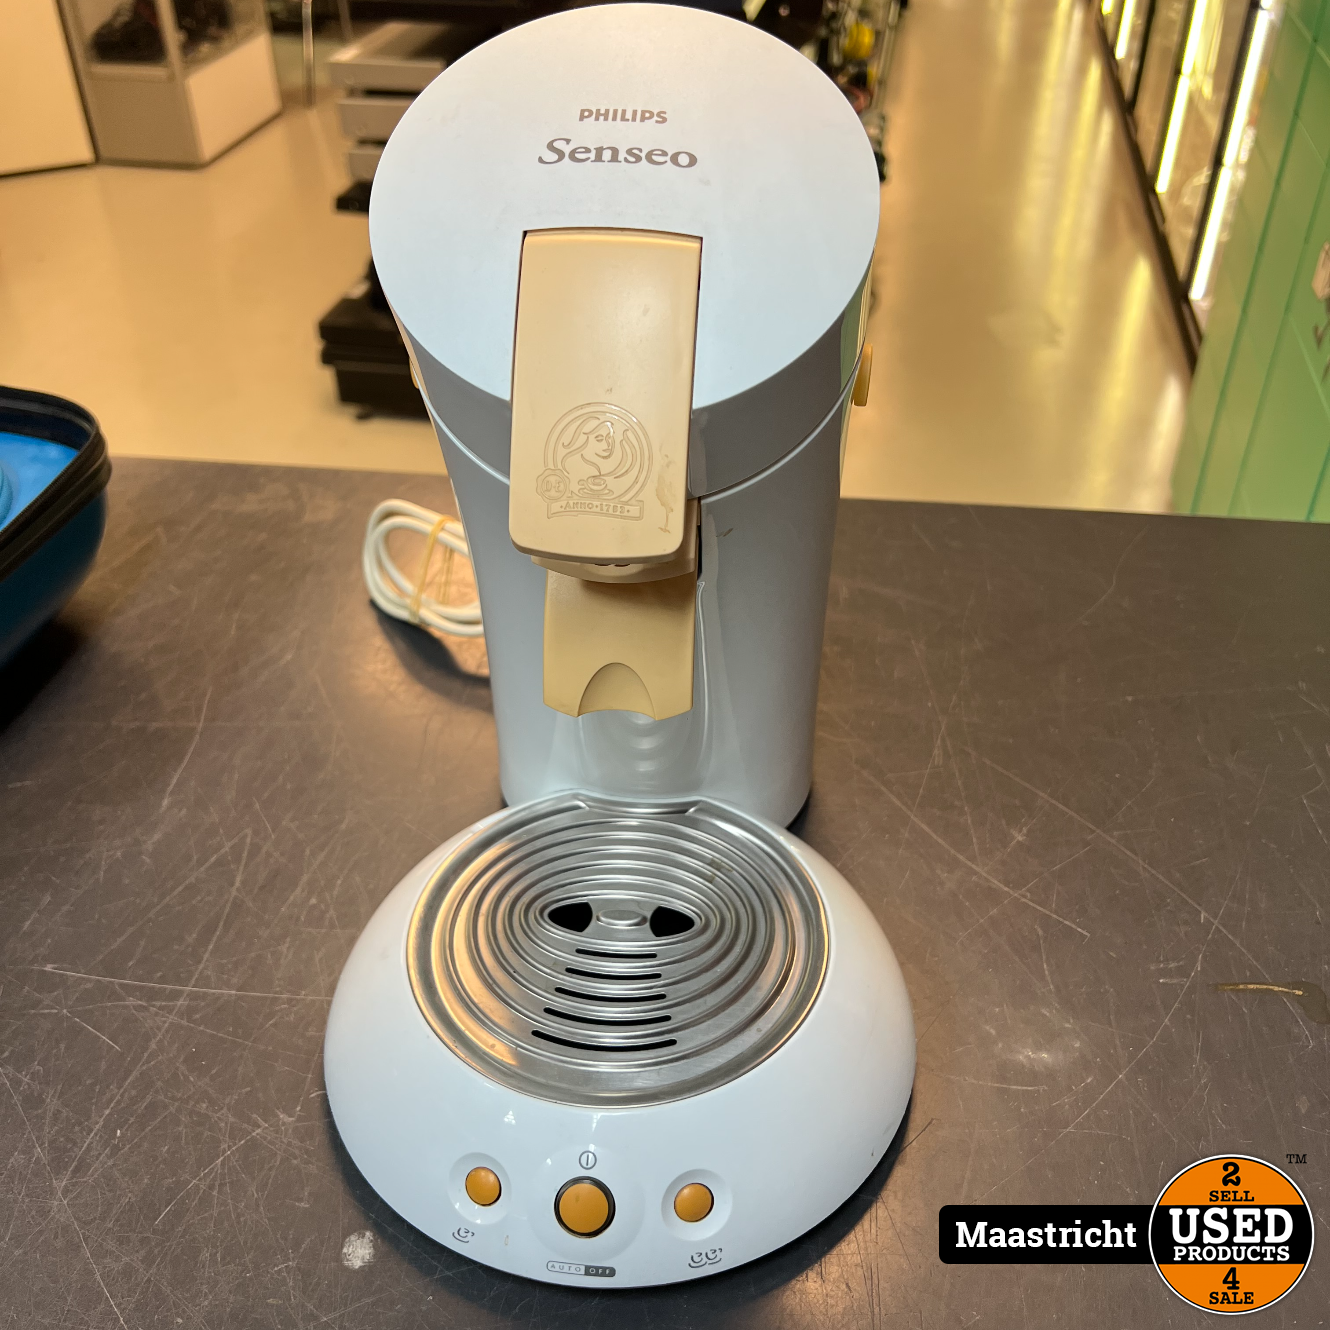 Gouverneur Berg Merchandiser Philips Senseo koffieapparaat - Used Products Maastricht